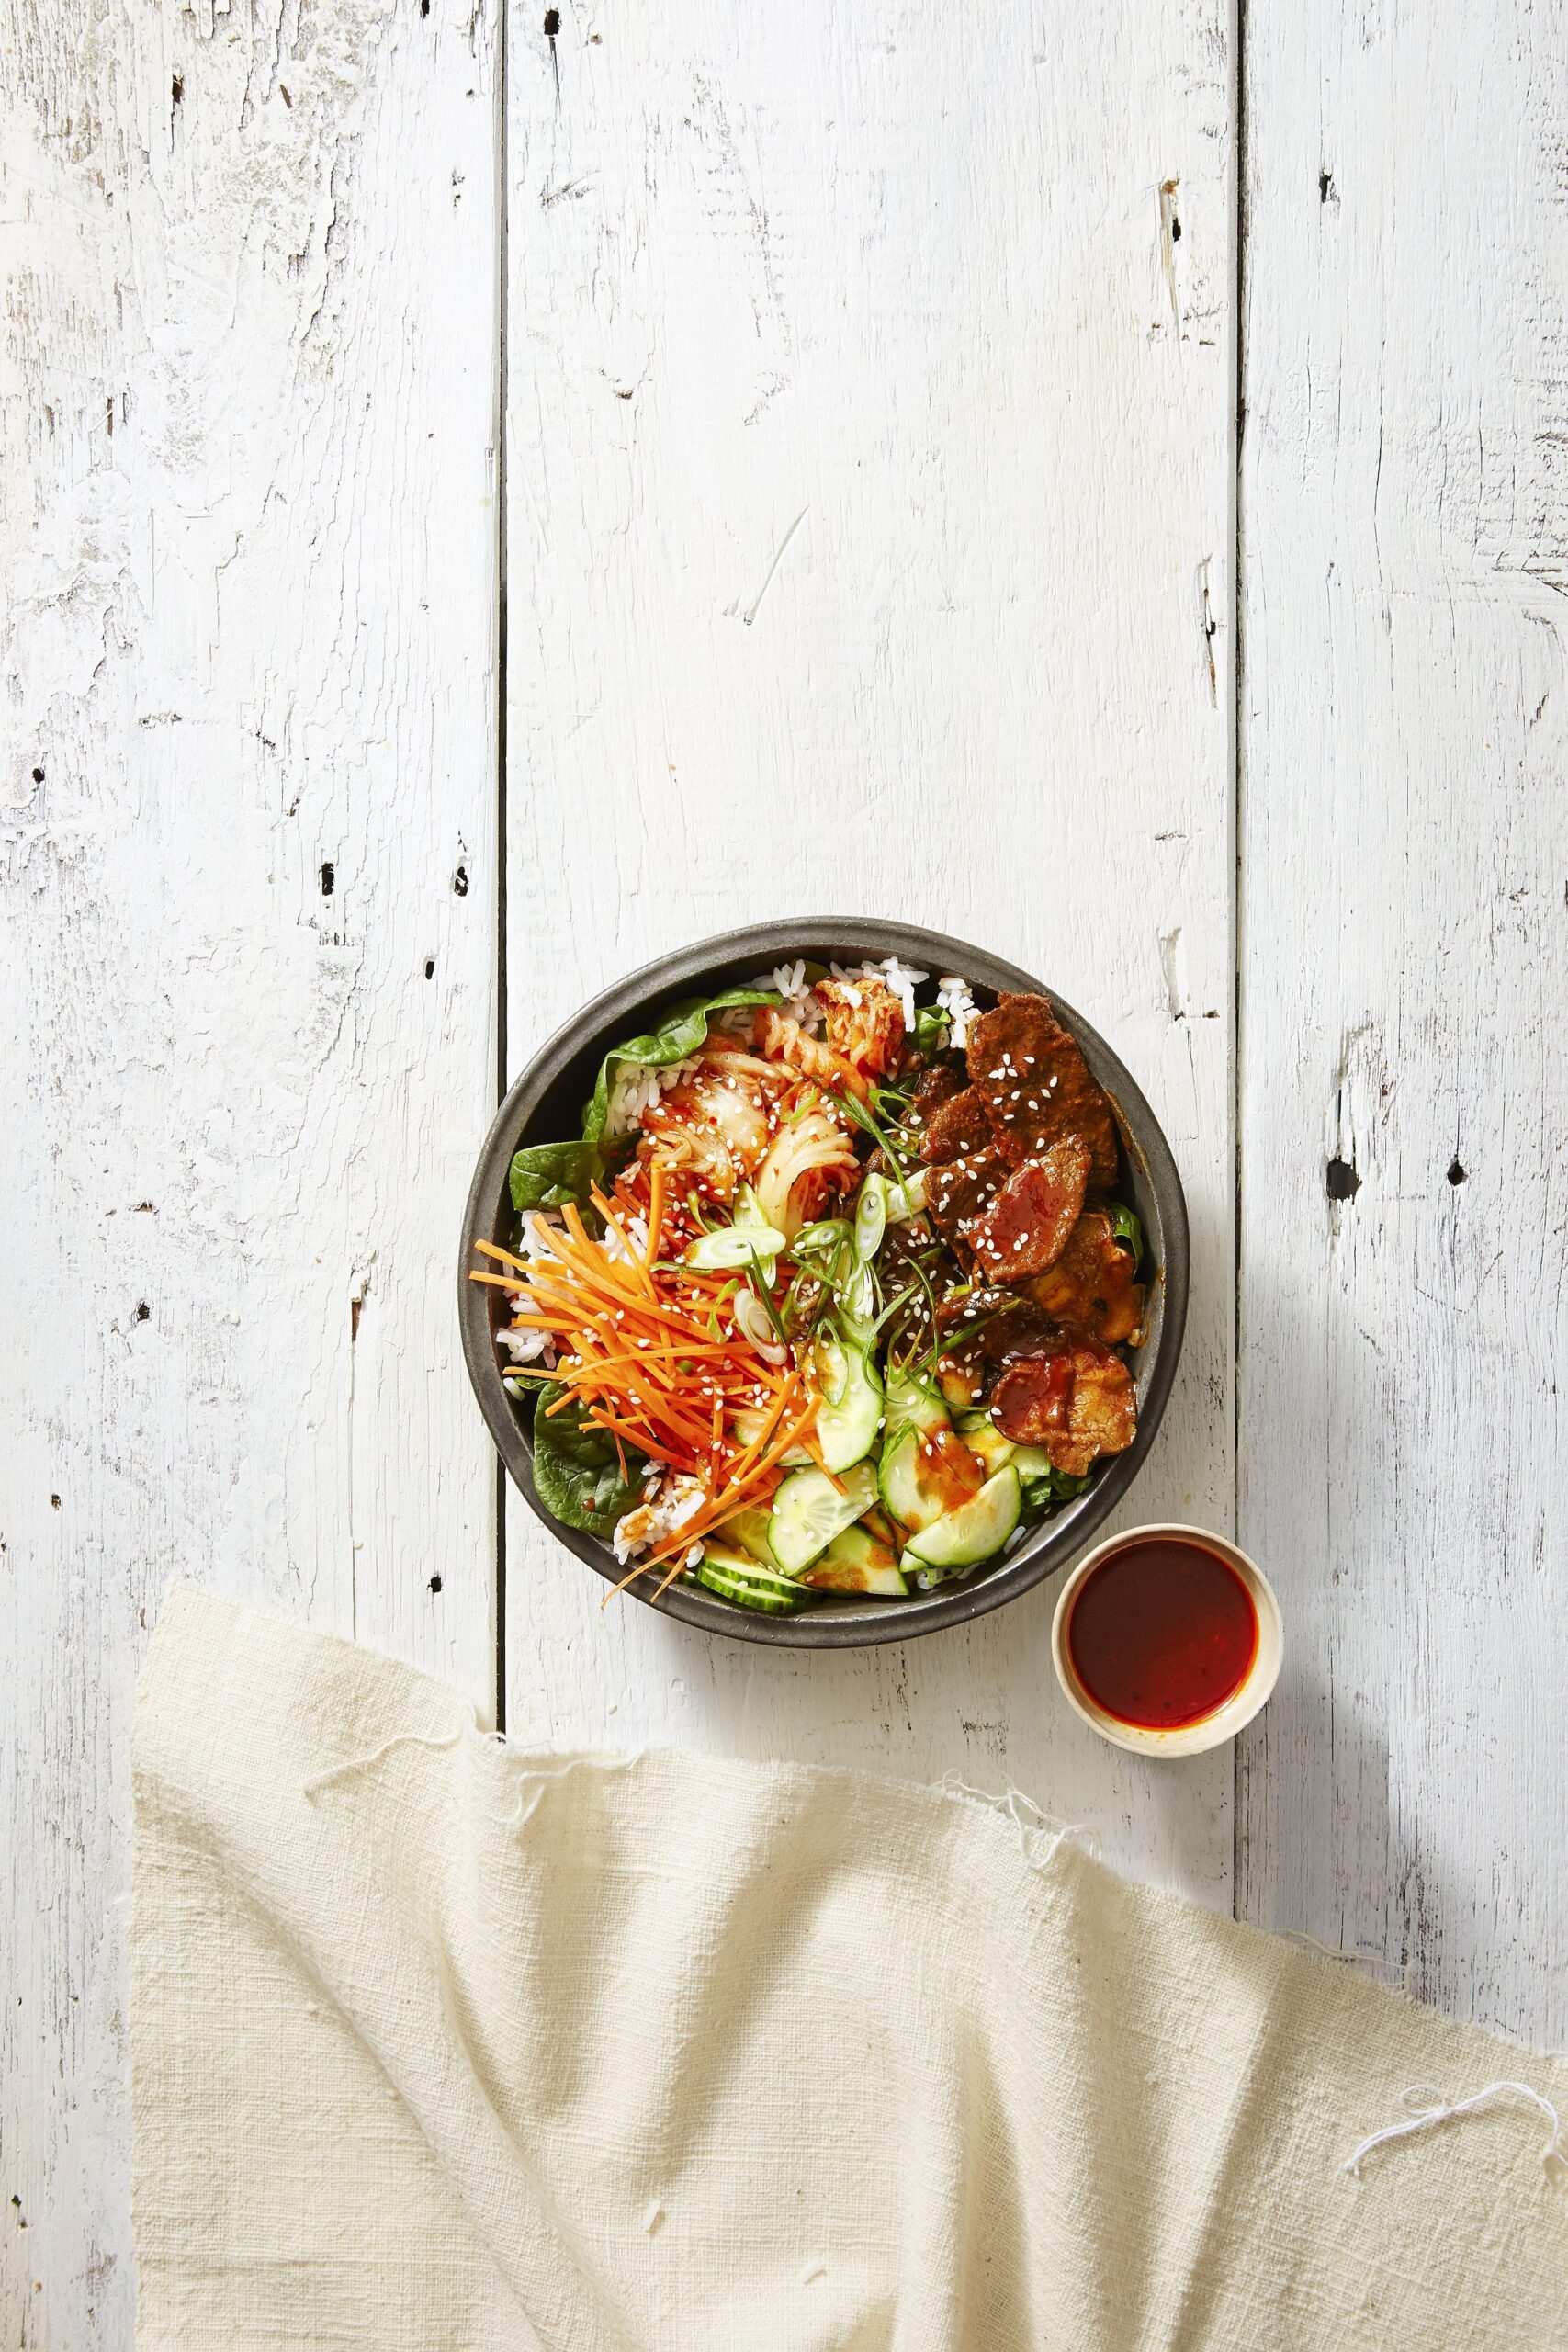  A warm and hearty bowl of rice beautifully layered with colorful veggies.